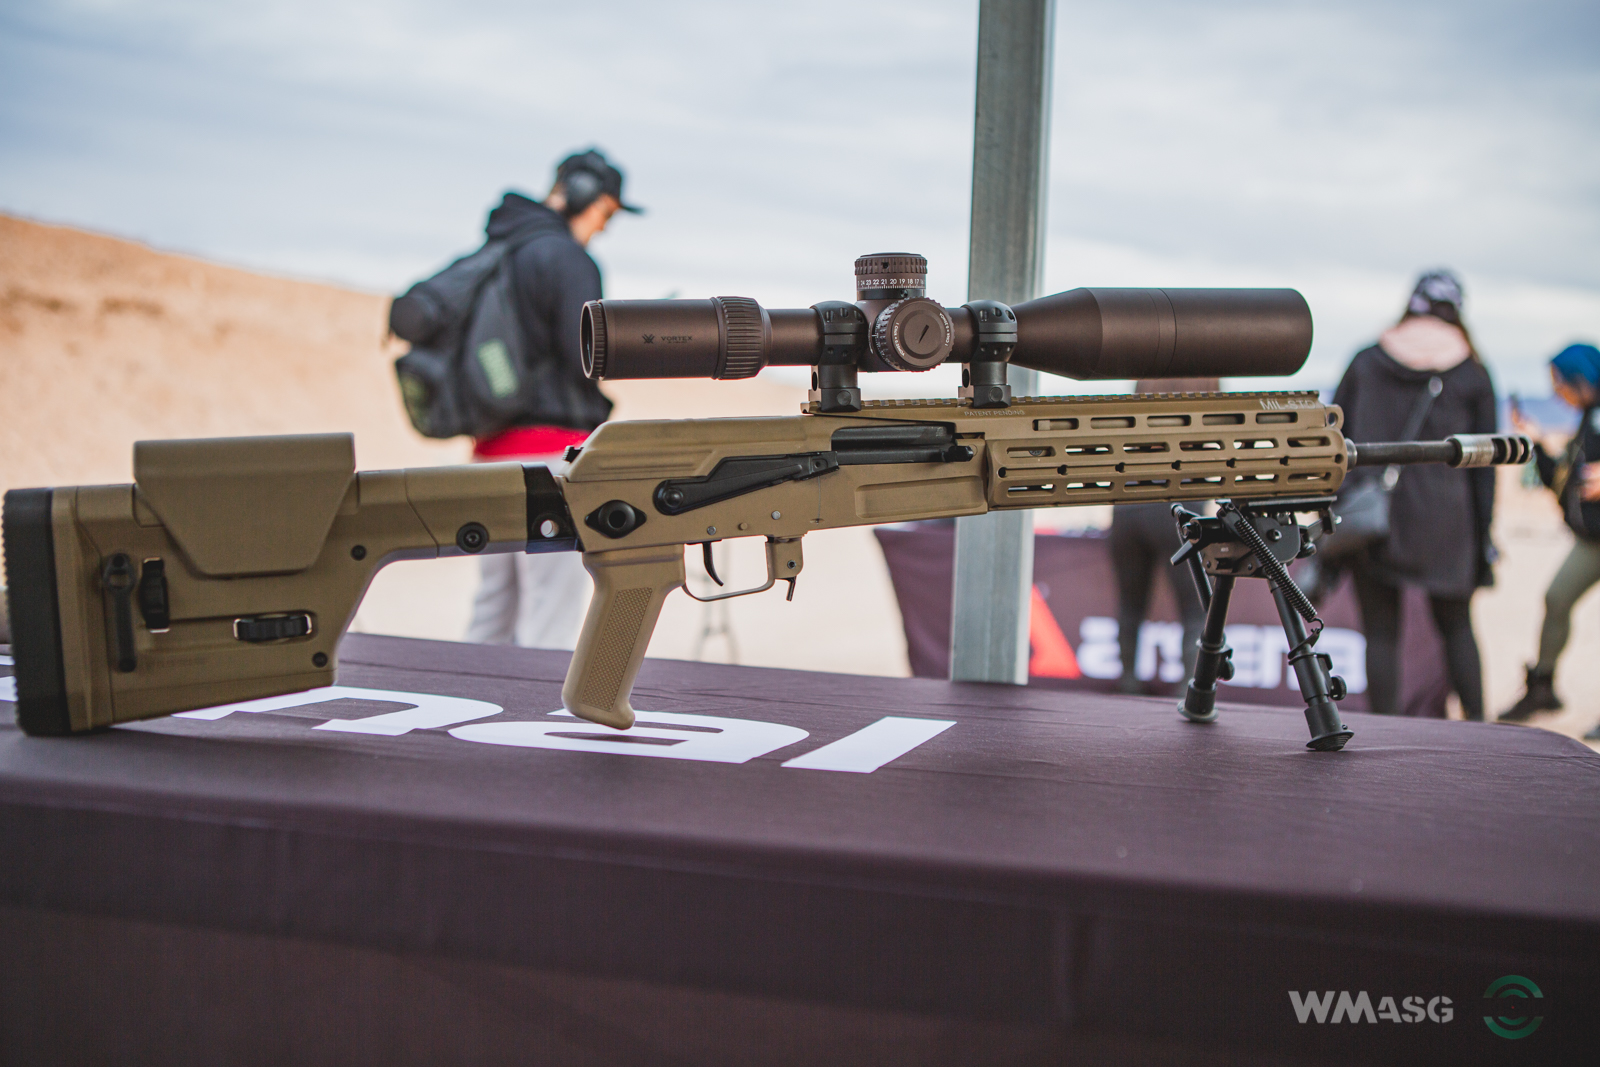 After SHOT: A quick look at the Arsenal Inc AK-20